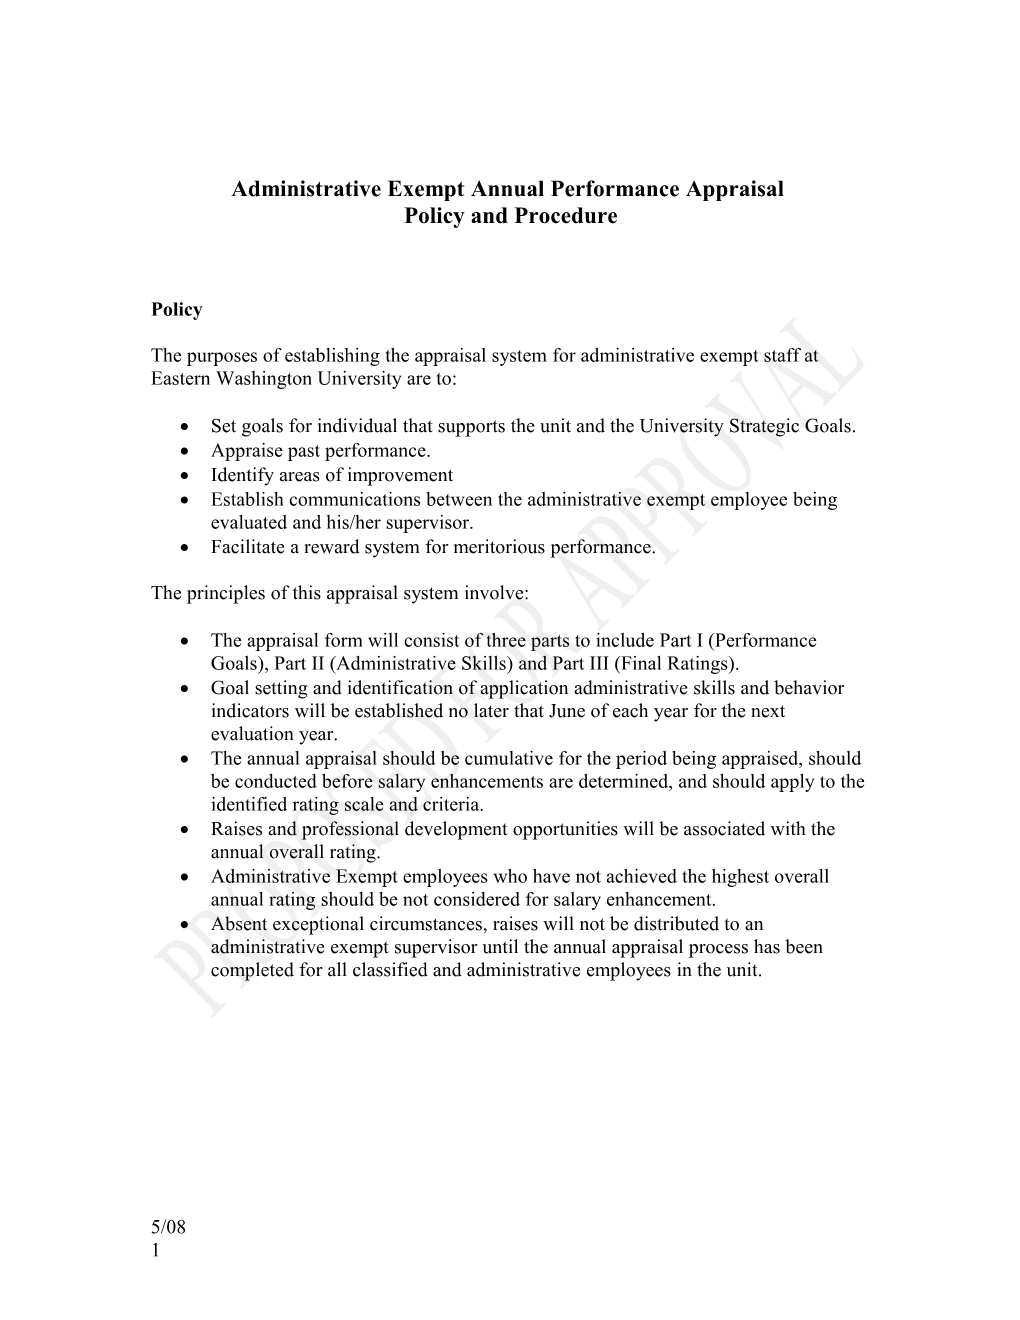 Administrative Exempt Annual Performance Appraisal Procedures